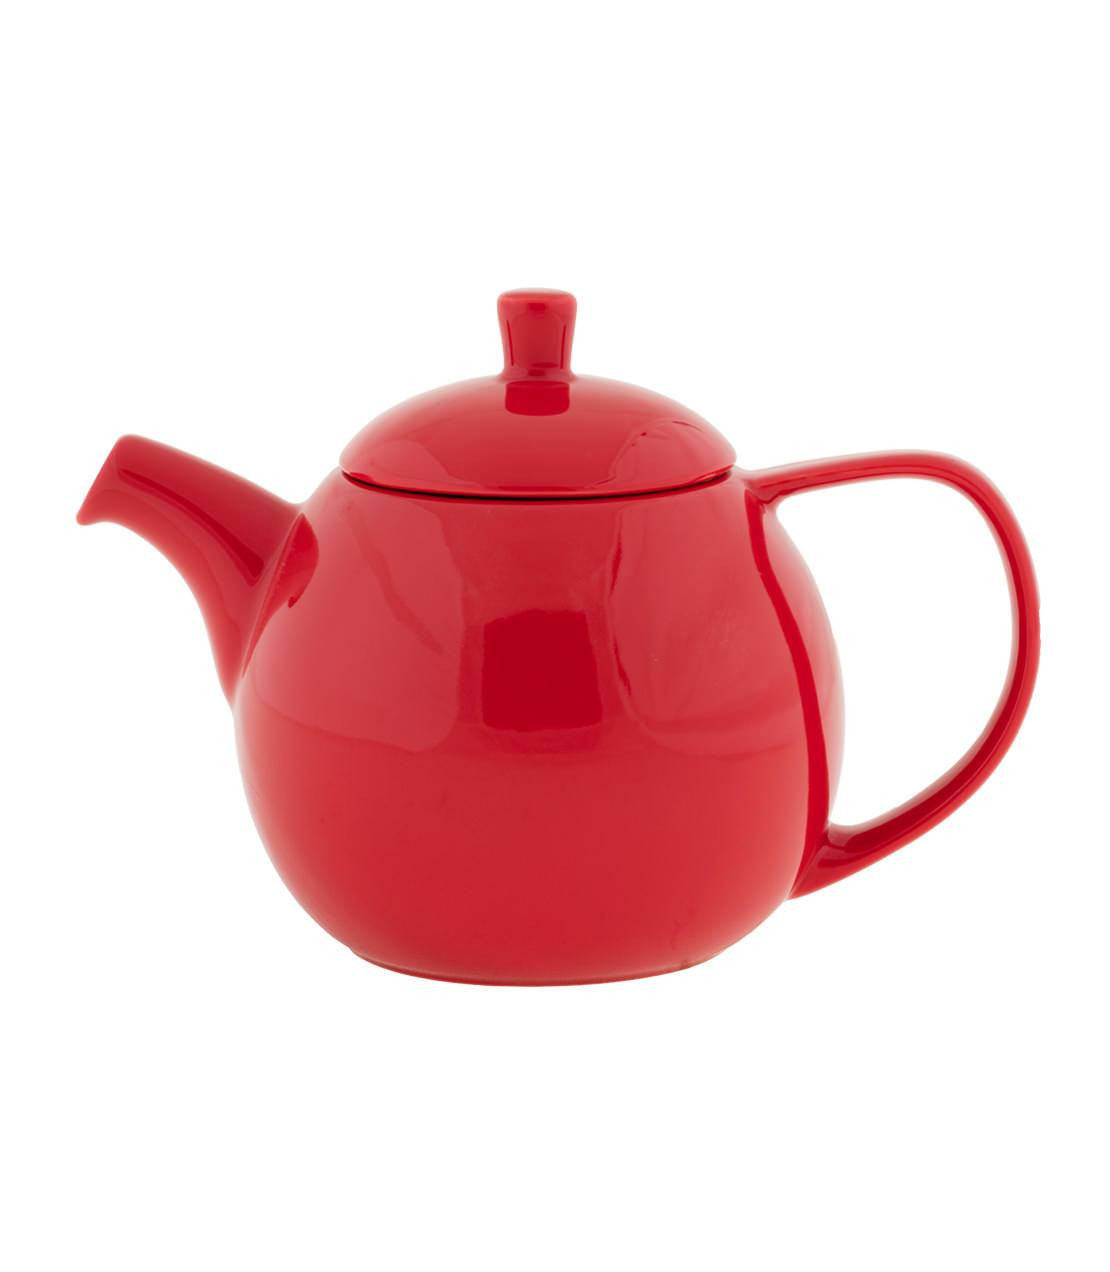 Curve Teapot with Infuser, 24 oz (Multiple Colors) - 24 oz. Red - Harney & Sons Fine Teas